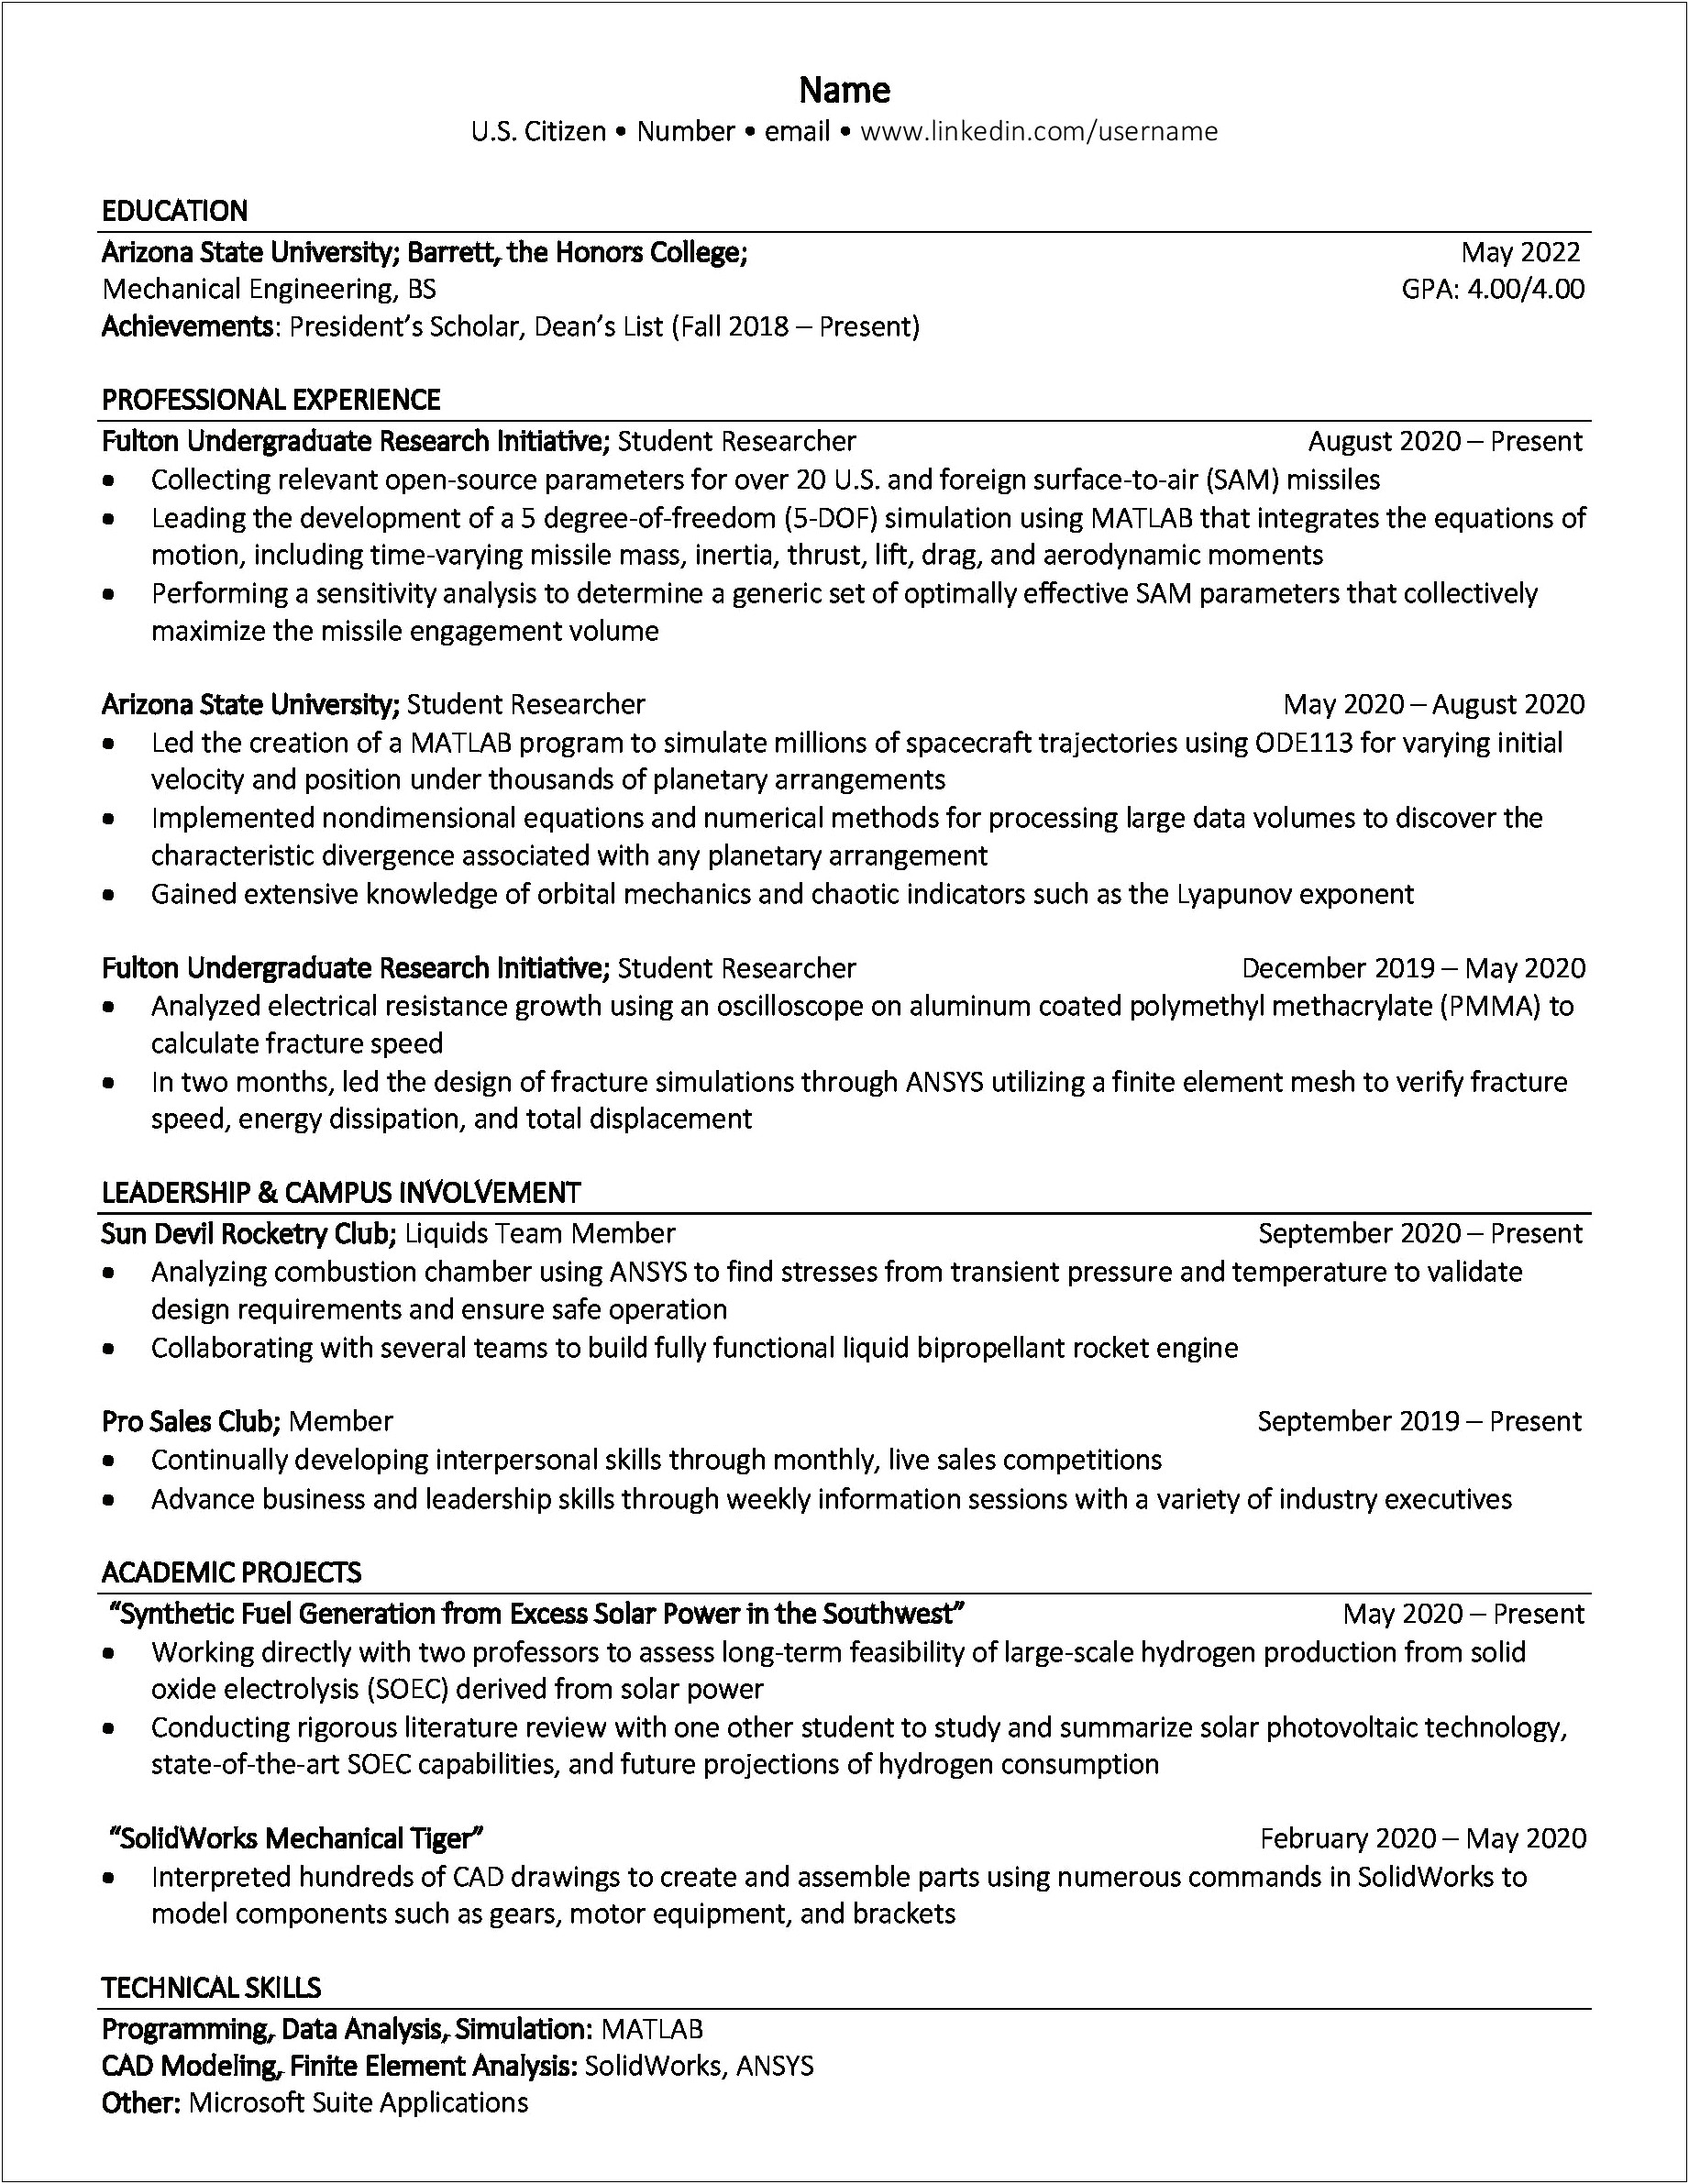 Put Link To Project In Resume Reddit